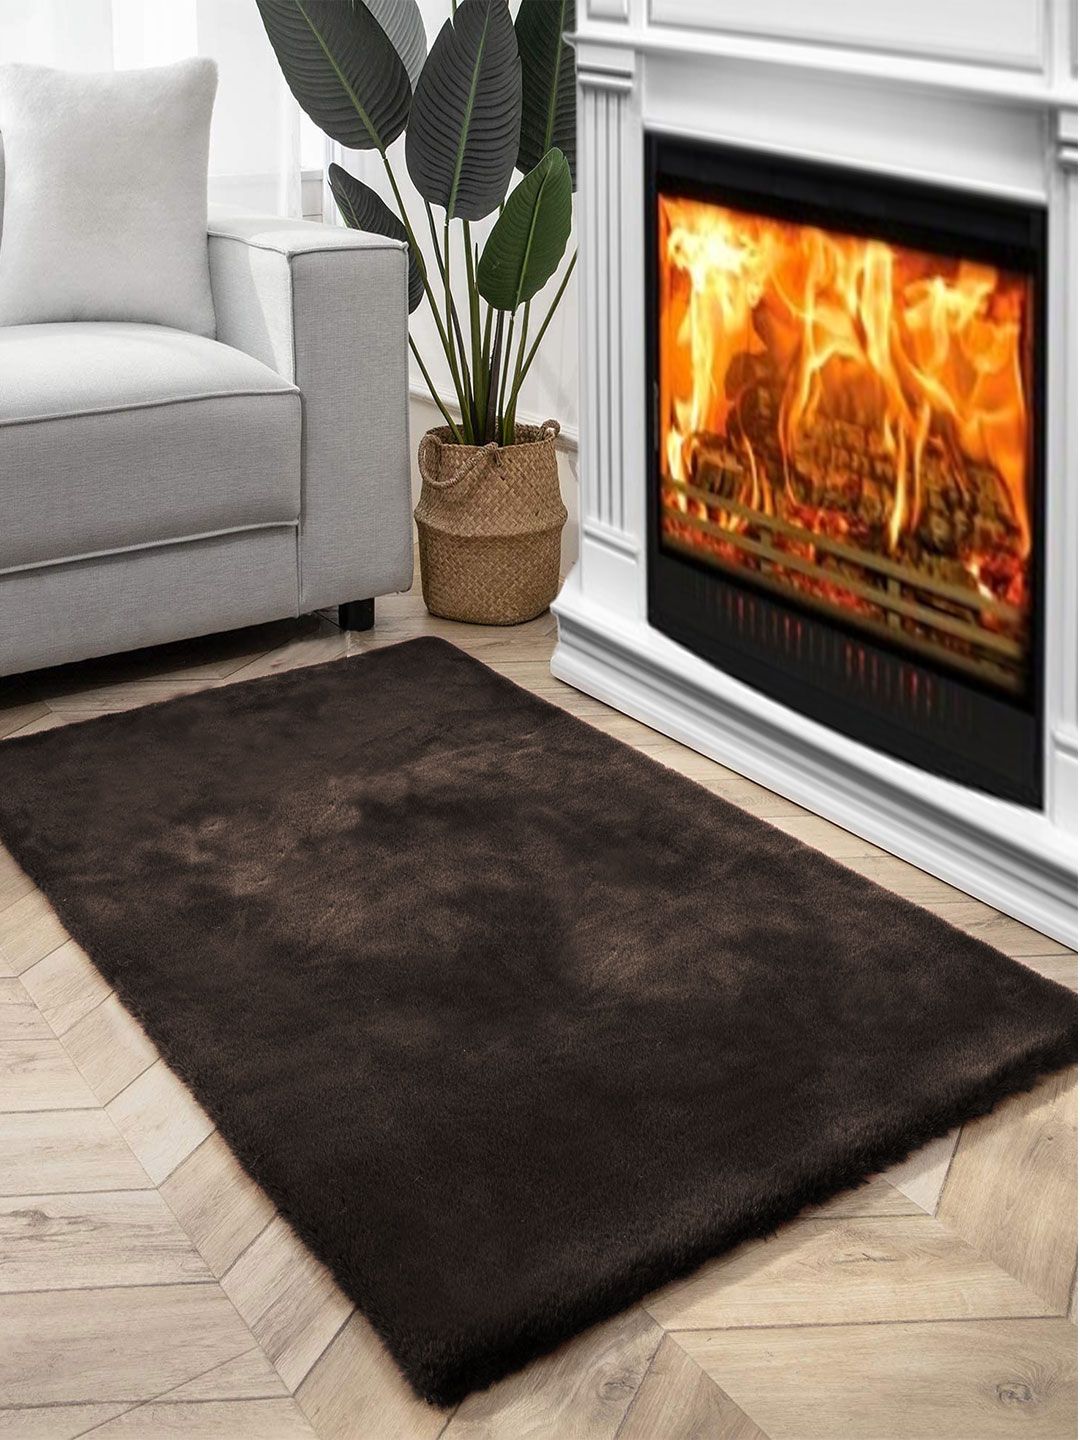 FI Brown Polycotton Solid Bath Rugs Price in India